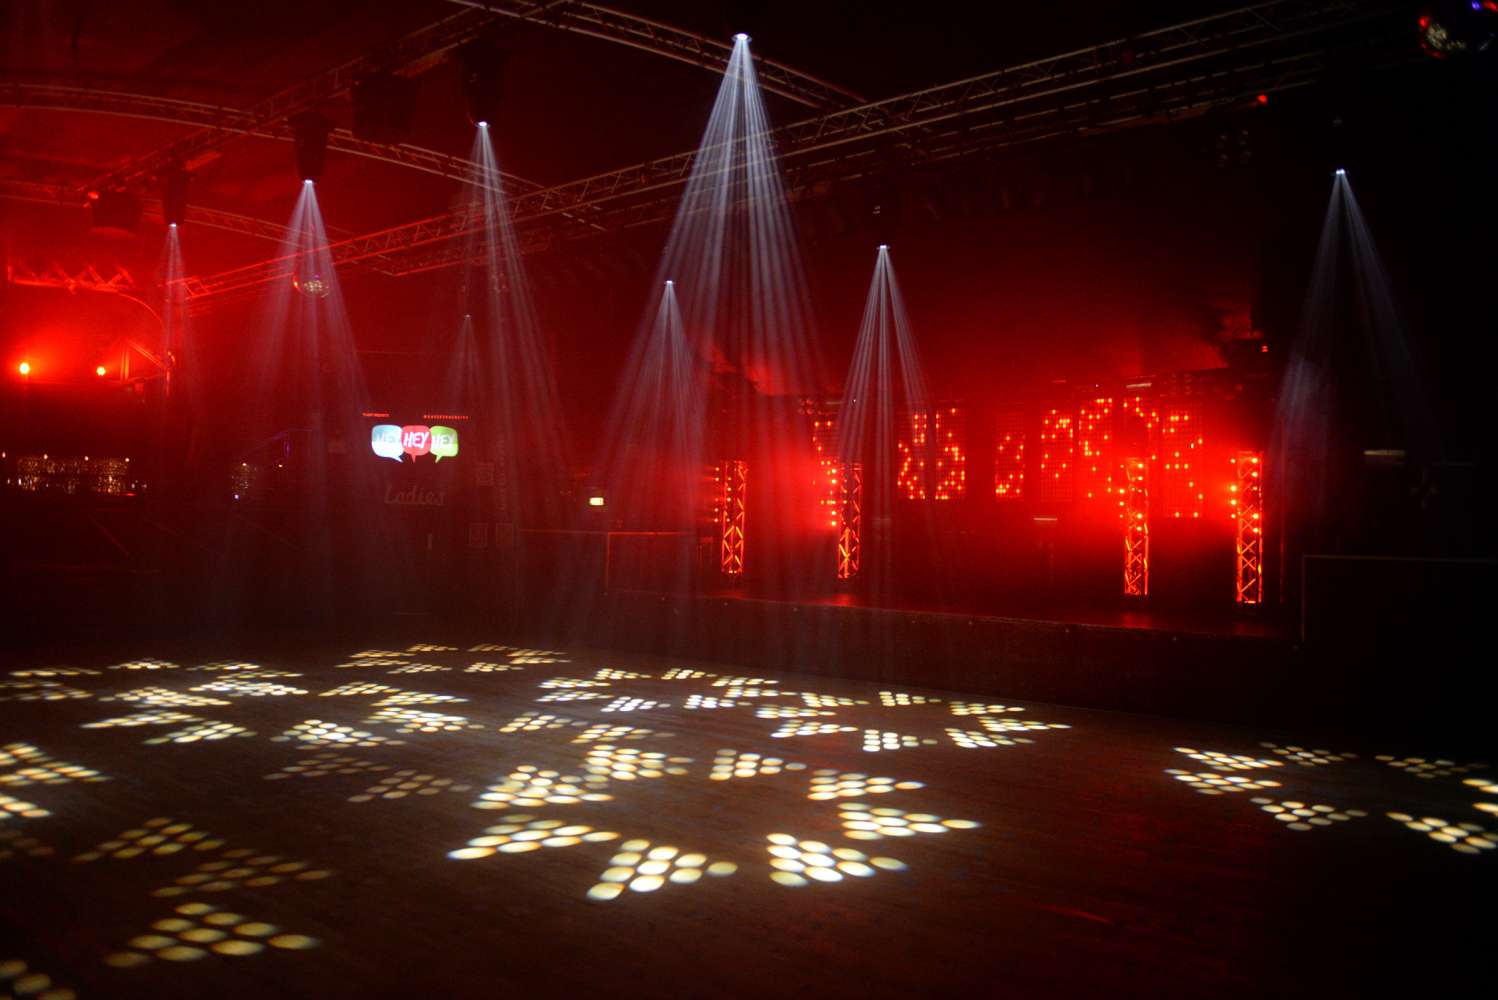 Lighting technician Mark Merry specified an array of Chauvet Professional fixtures